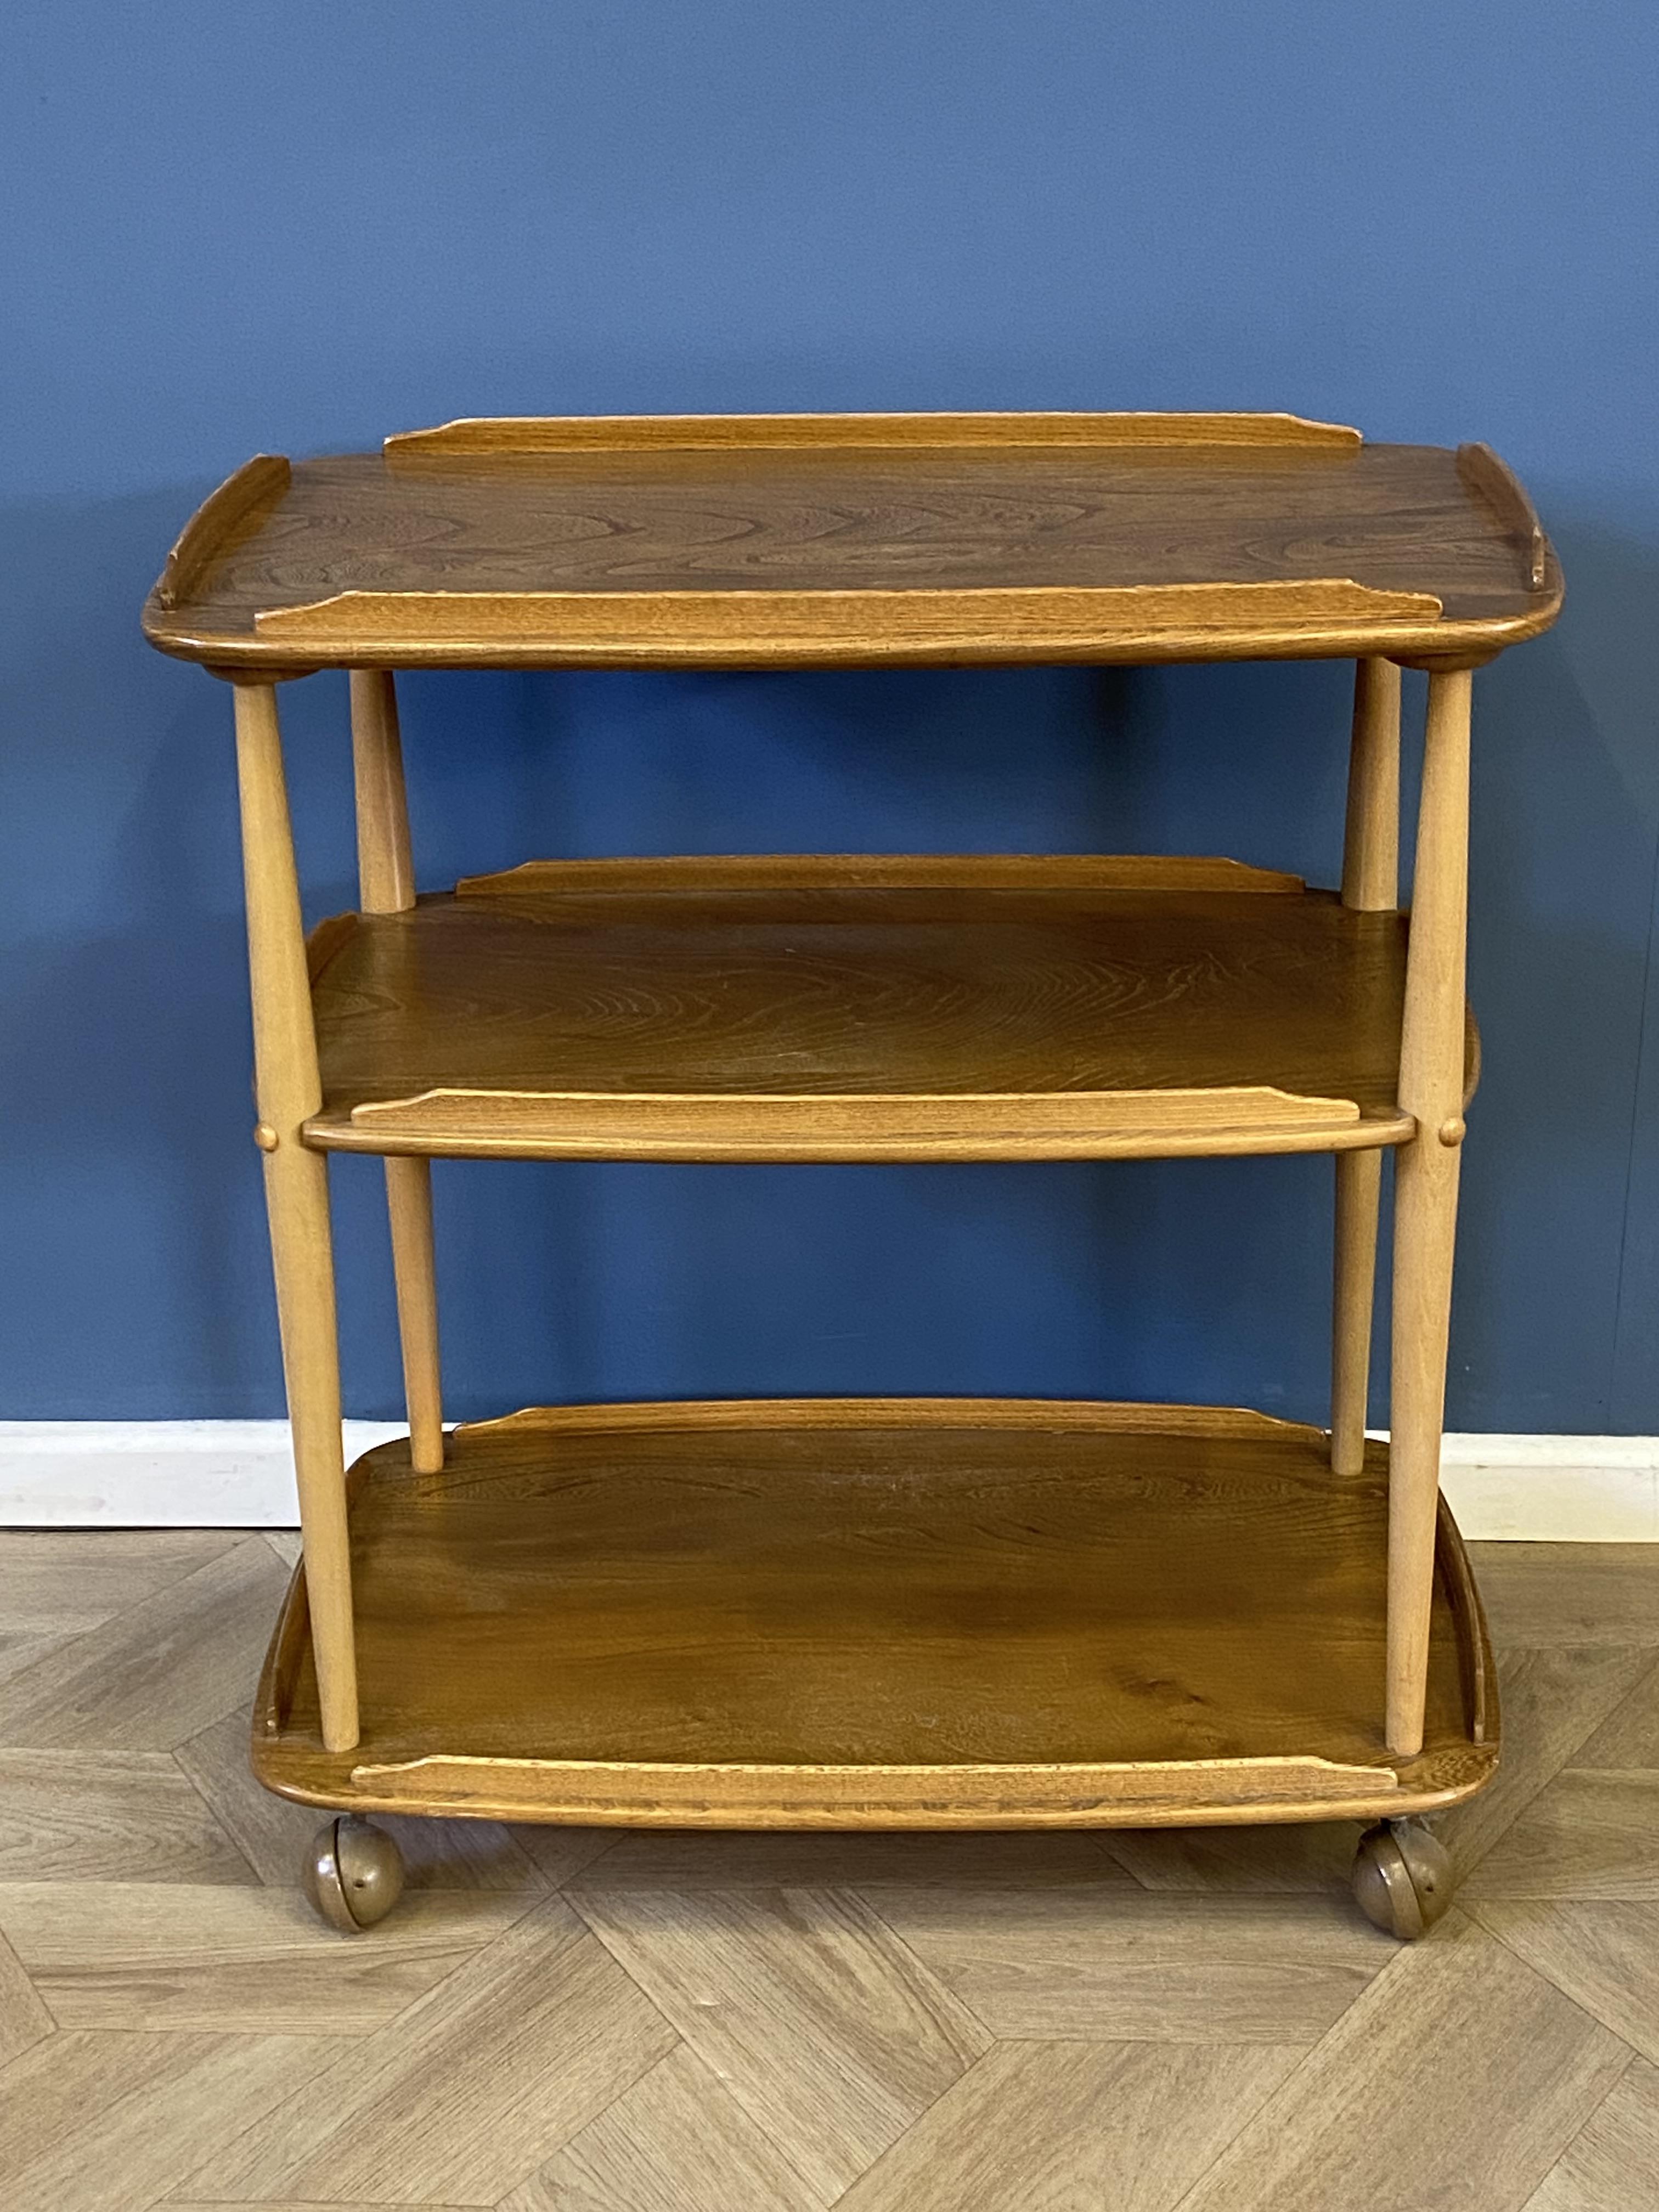 Ercol style three tier serving trolley - Image 4 of 5